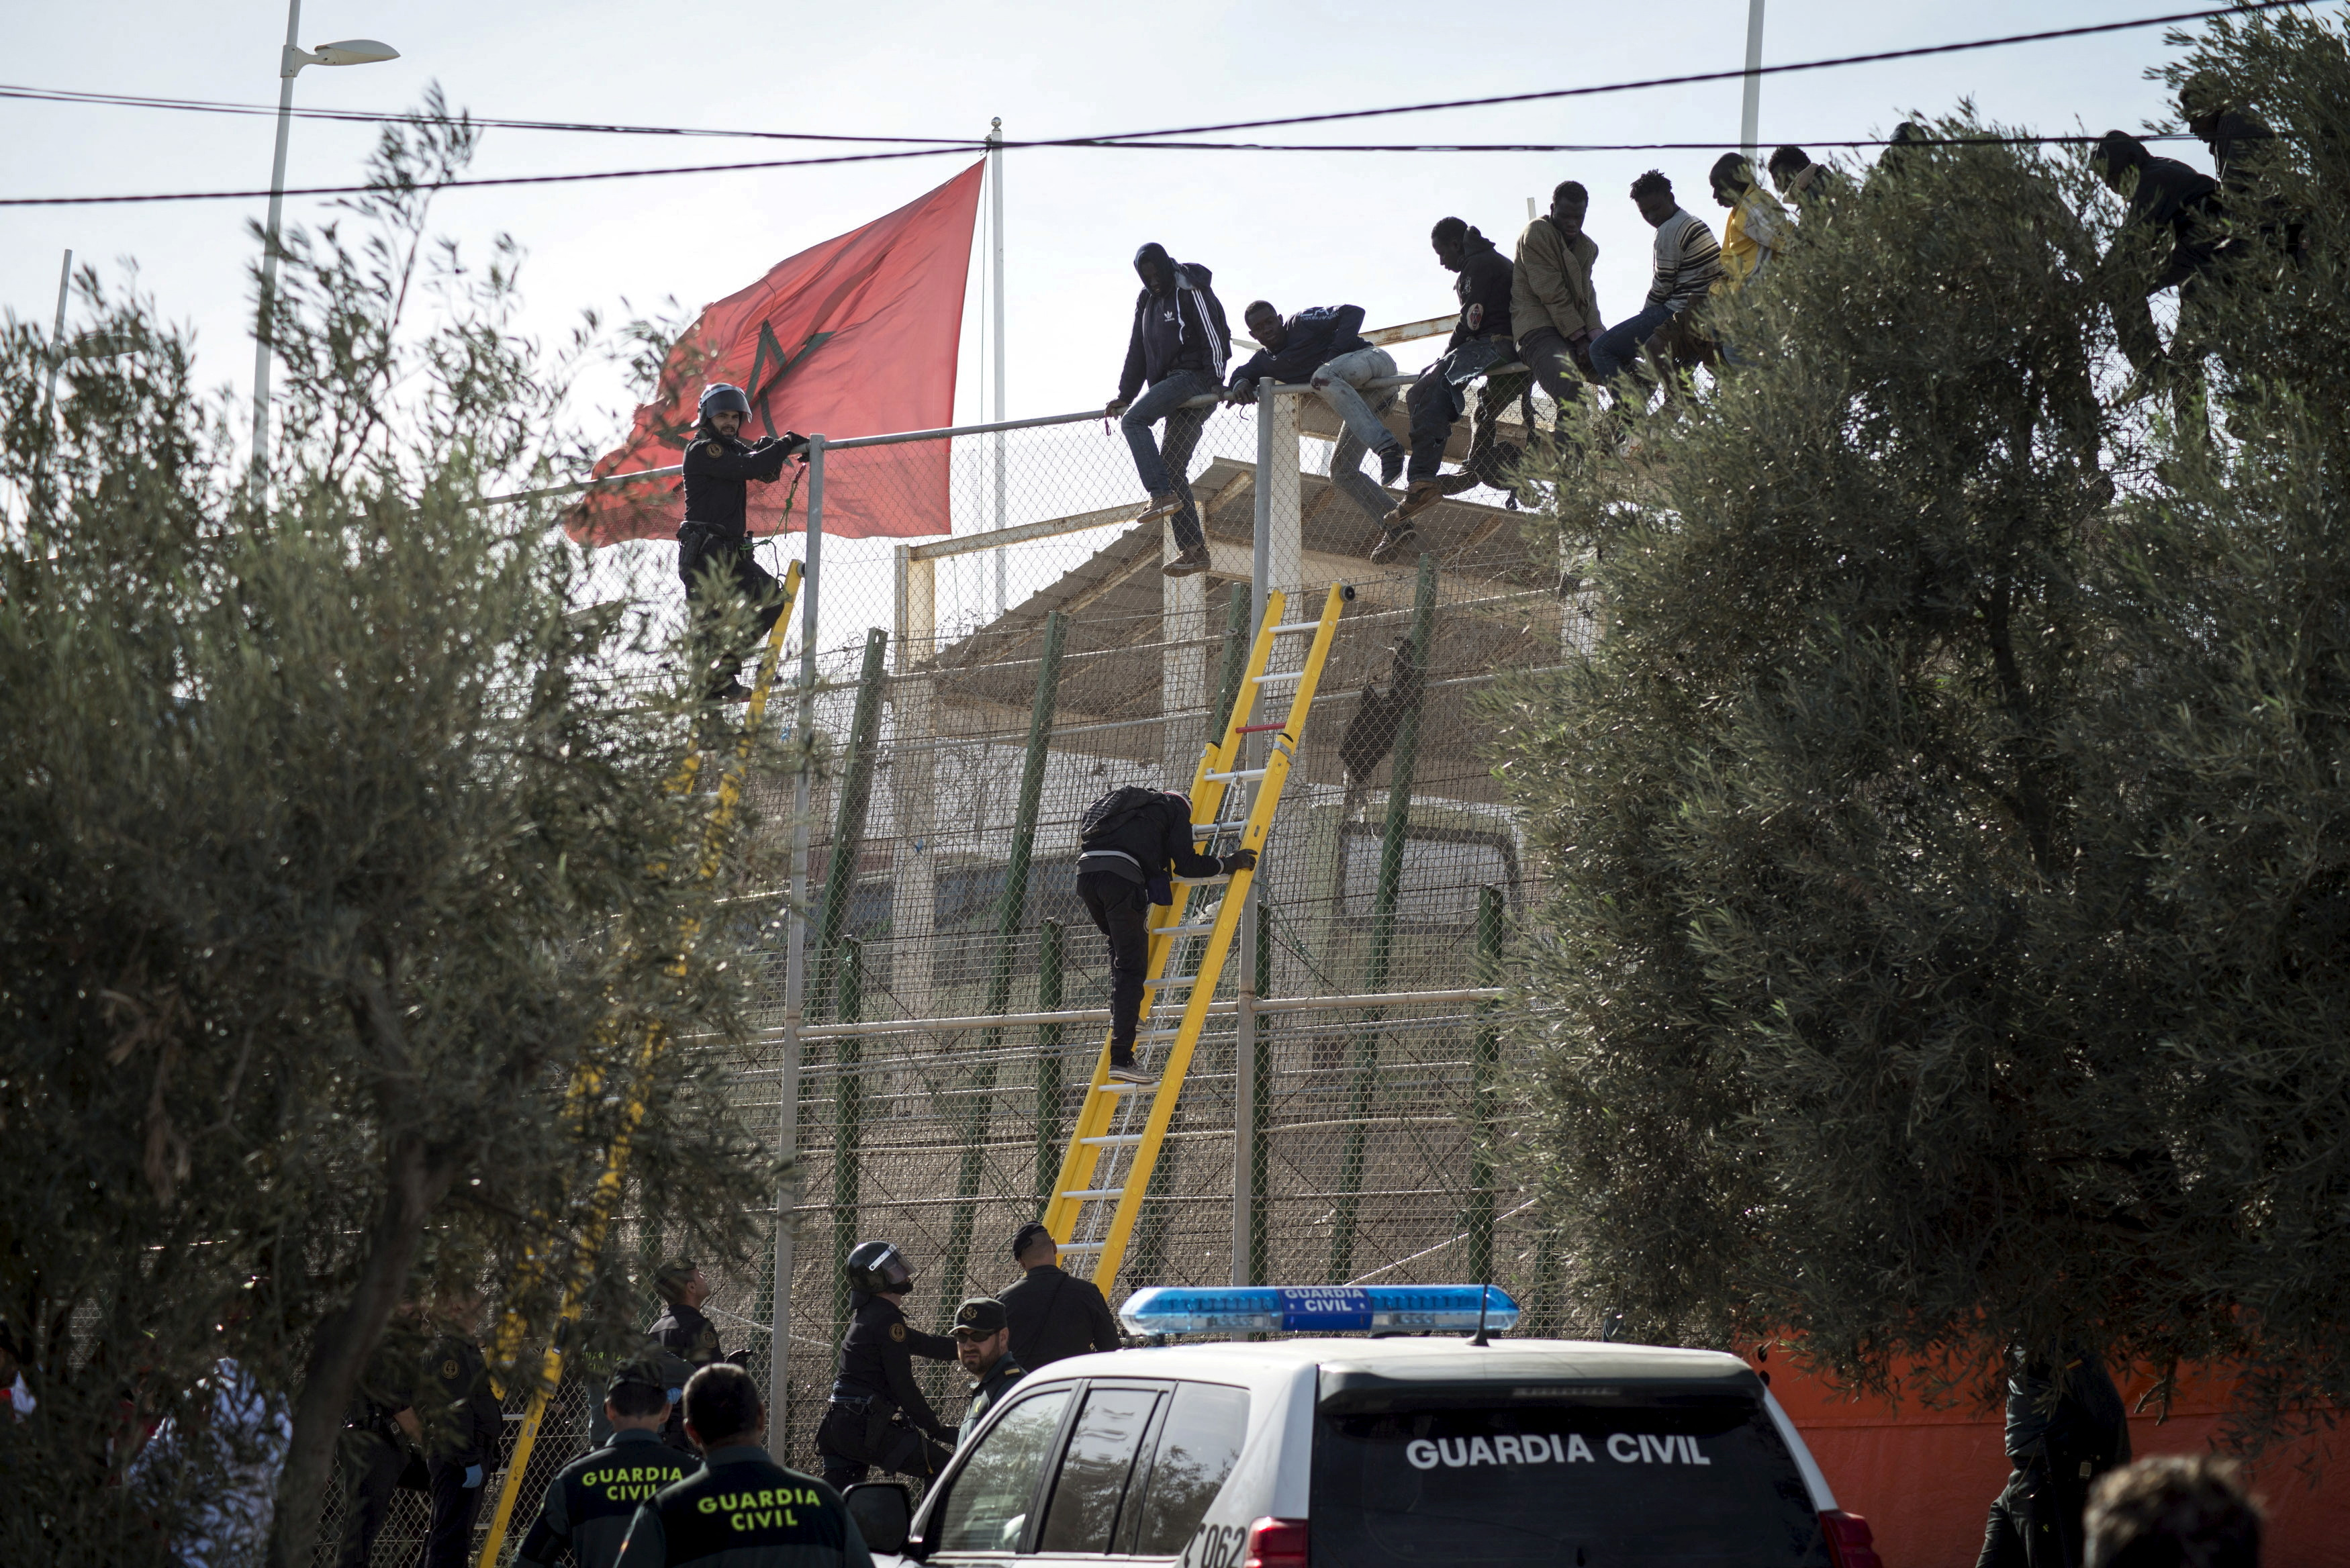 Video Shows Dozens of Dead Migrants Piled Together at Melilla Border Fence